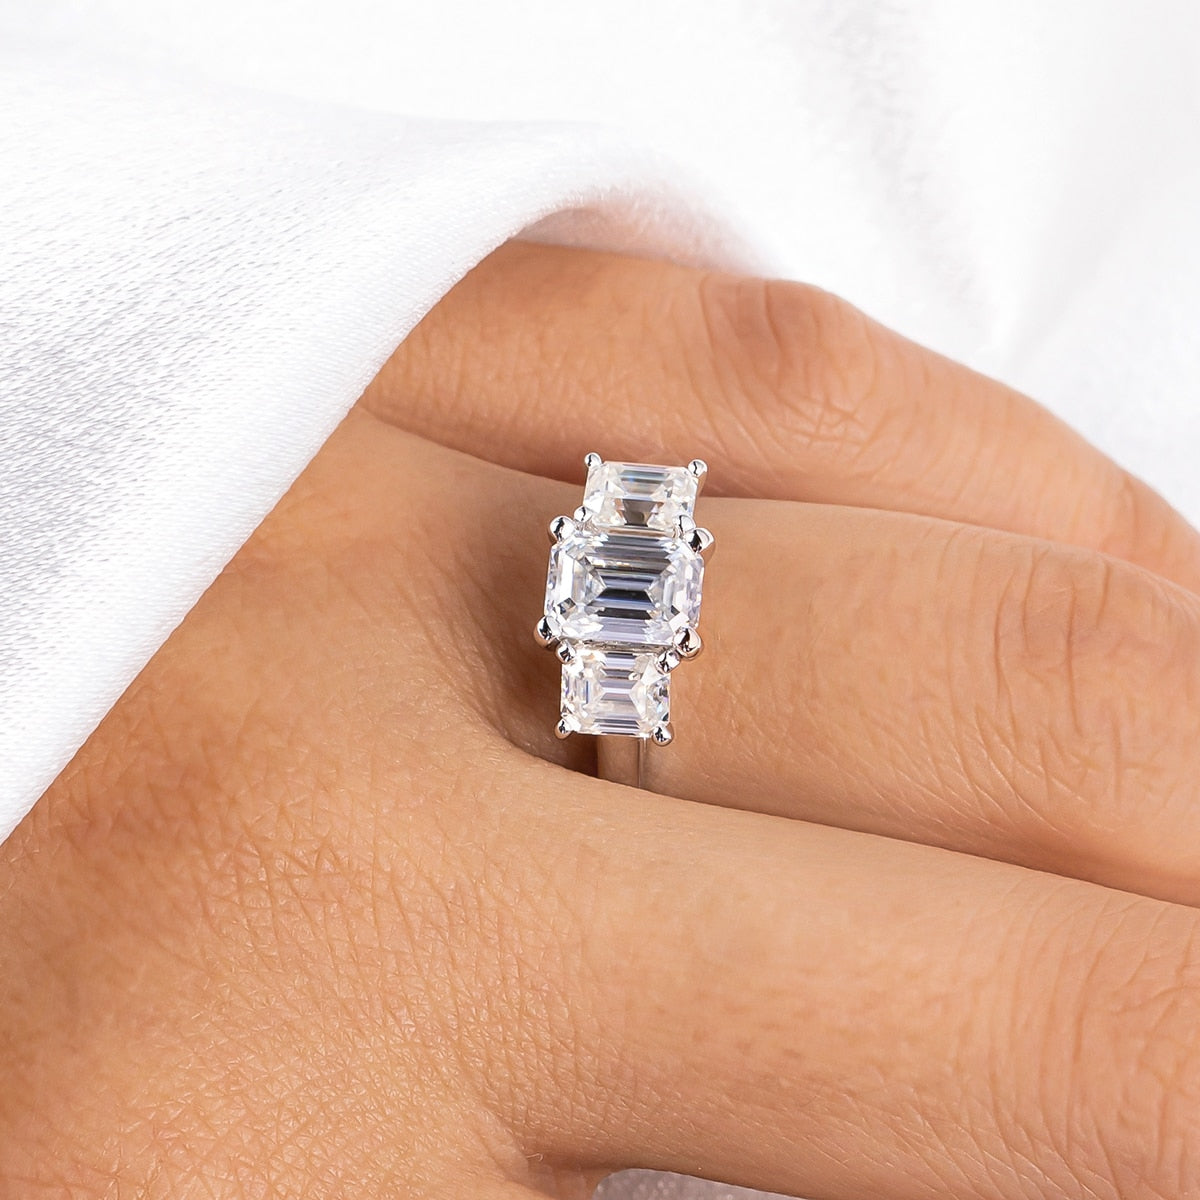 A hand wearing silver 3 stone ring with a 1CT emerald cut moissanite set between two smaller emerald cut moissanites.